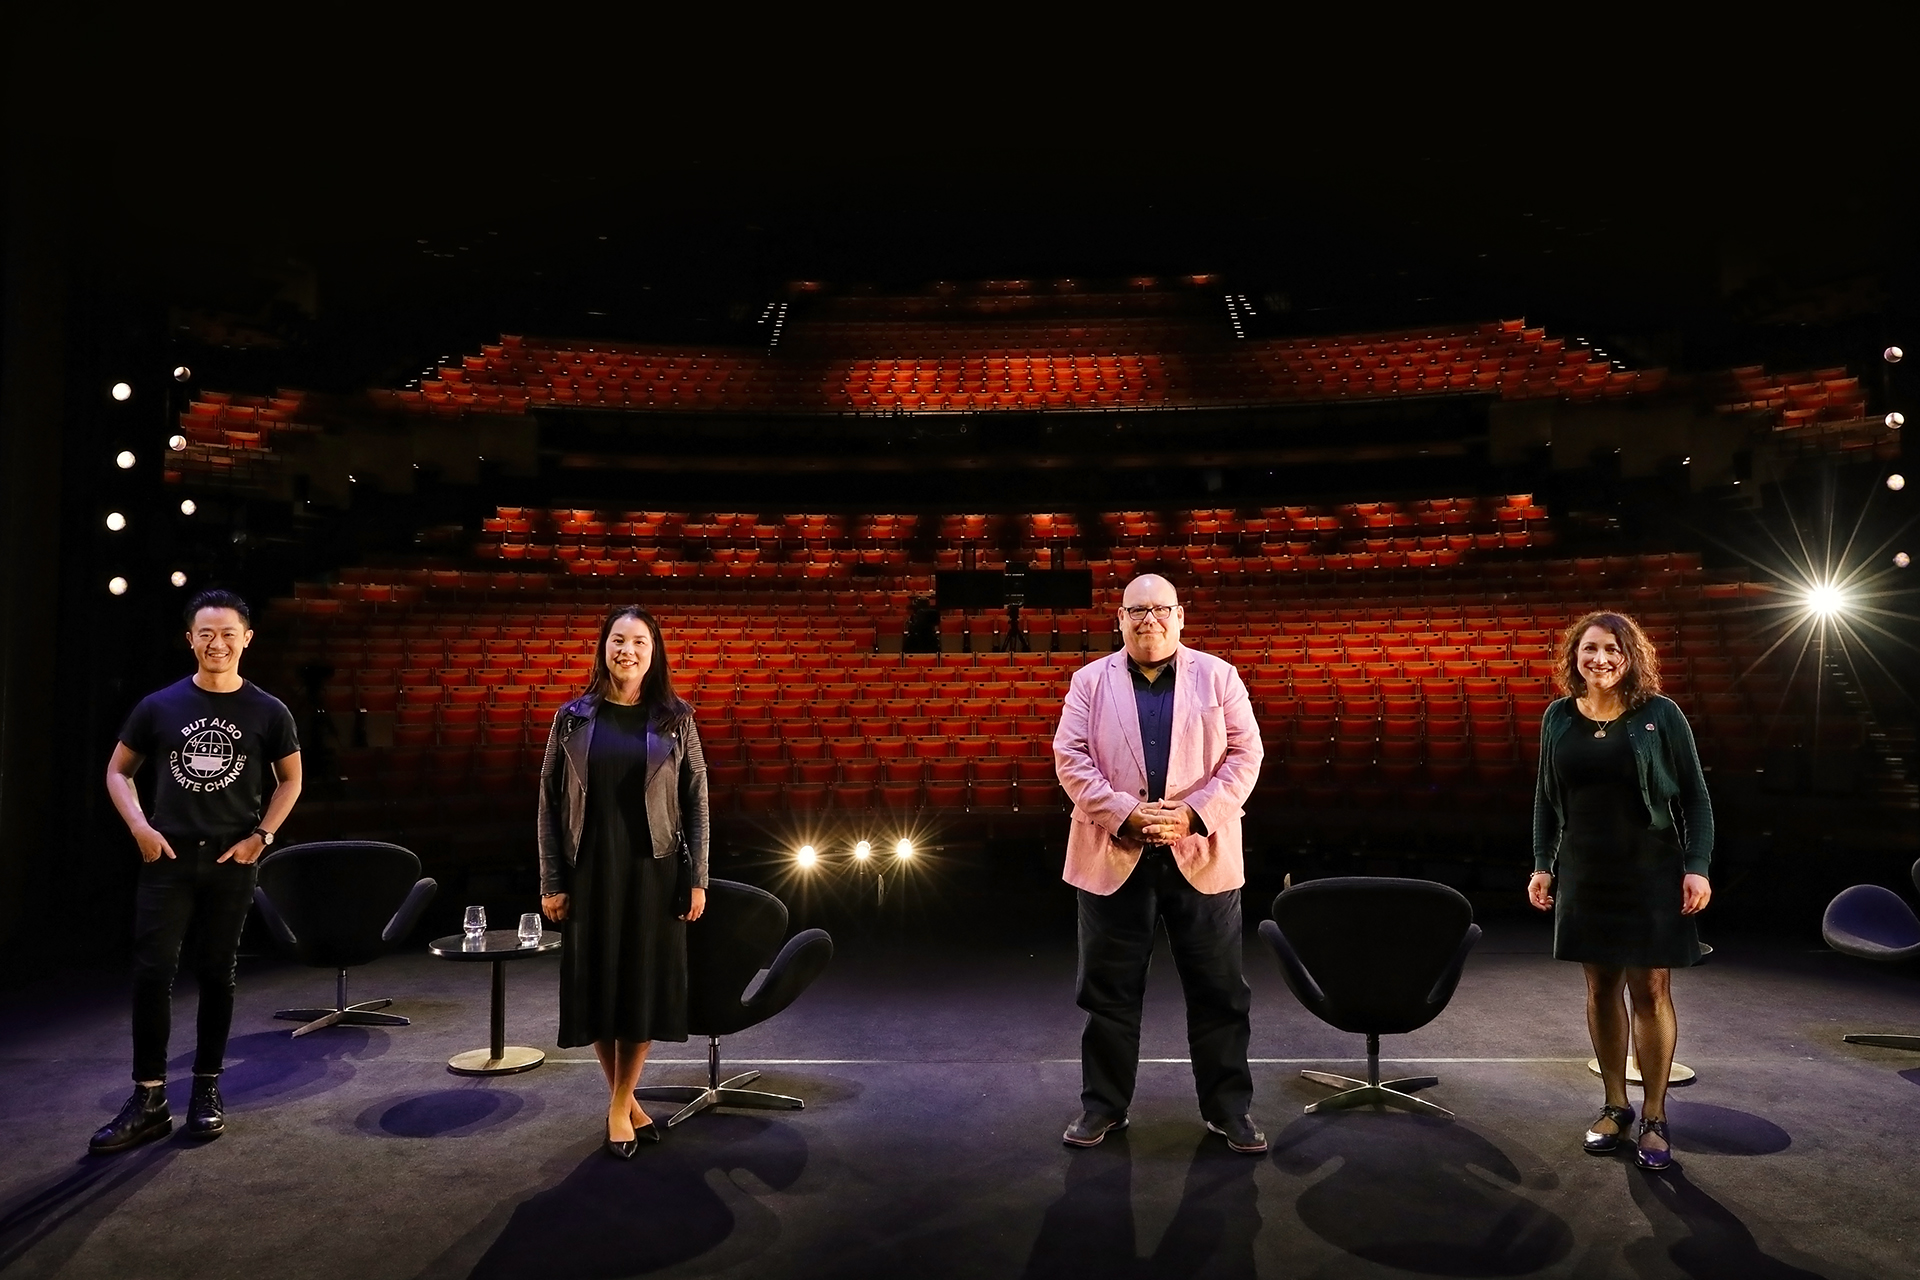 Benjamin Law, Mikala Tai, Peter White and Lena Nahlous standing on stage at the Sydney Opera House